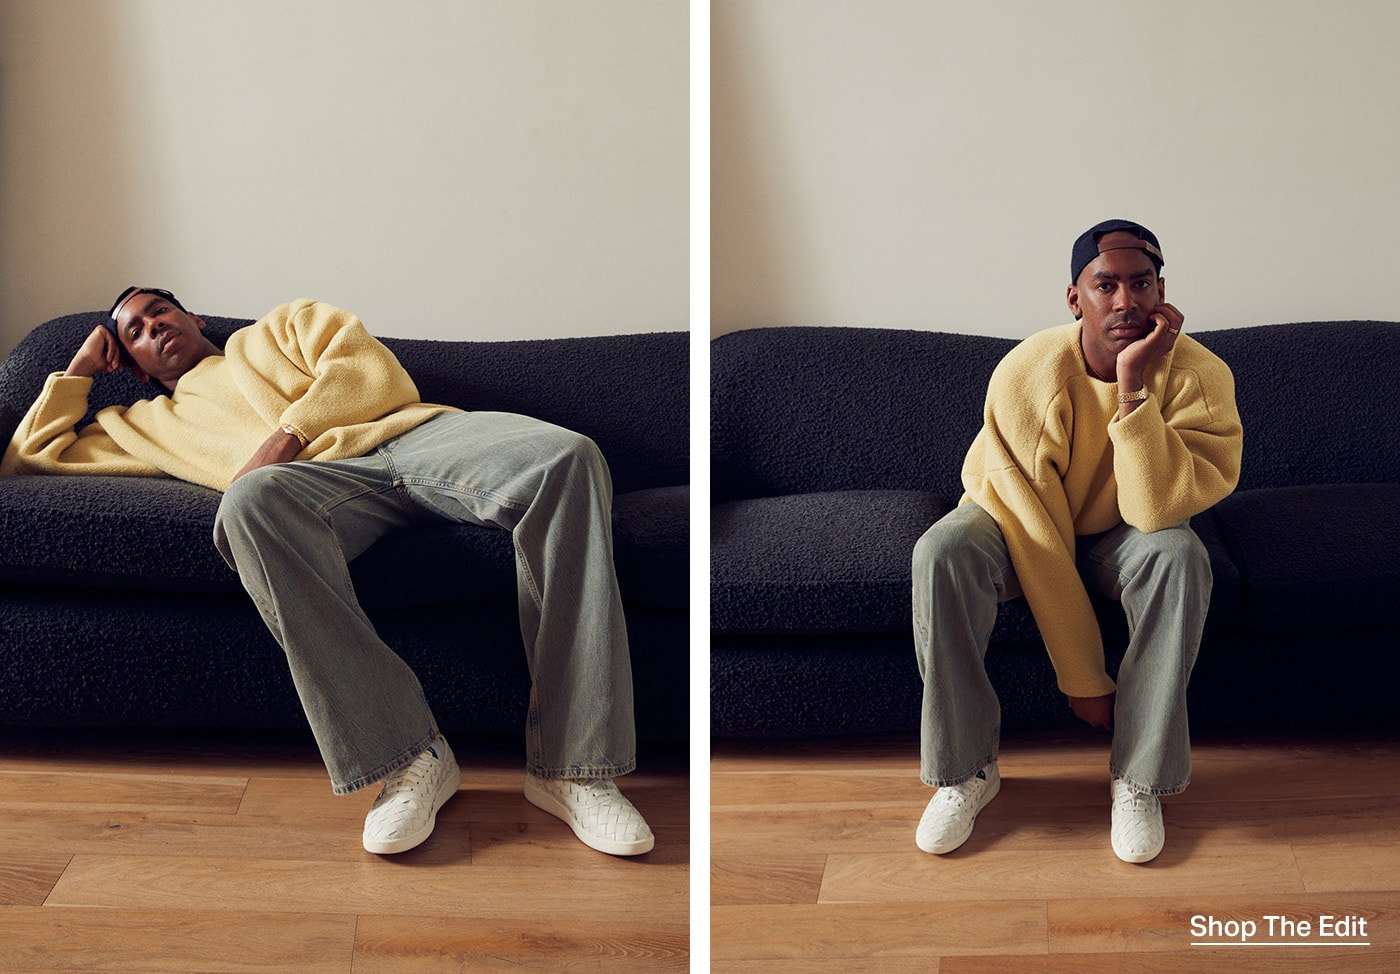 Jason Bolden sitting on a dark violet couch in a lemon cream Fear Of God sweater and denim jeans.